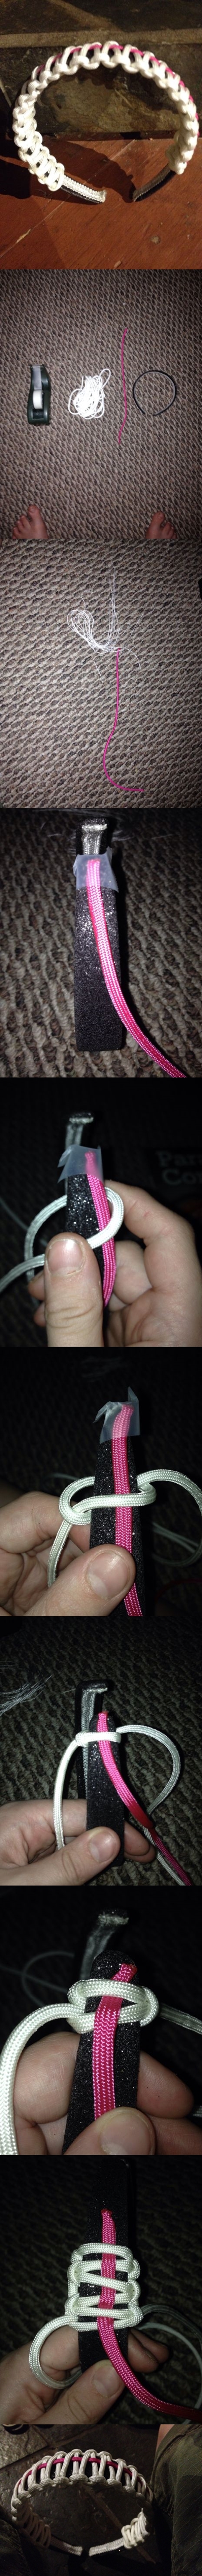 diy-paracord-projects-useful-daily-life